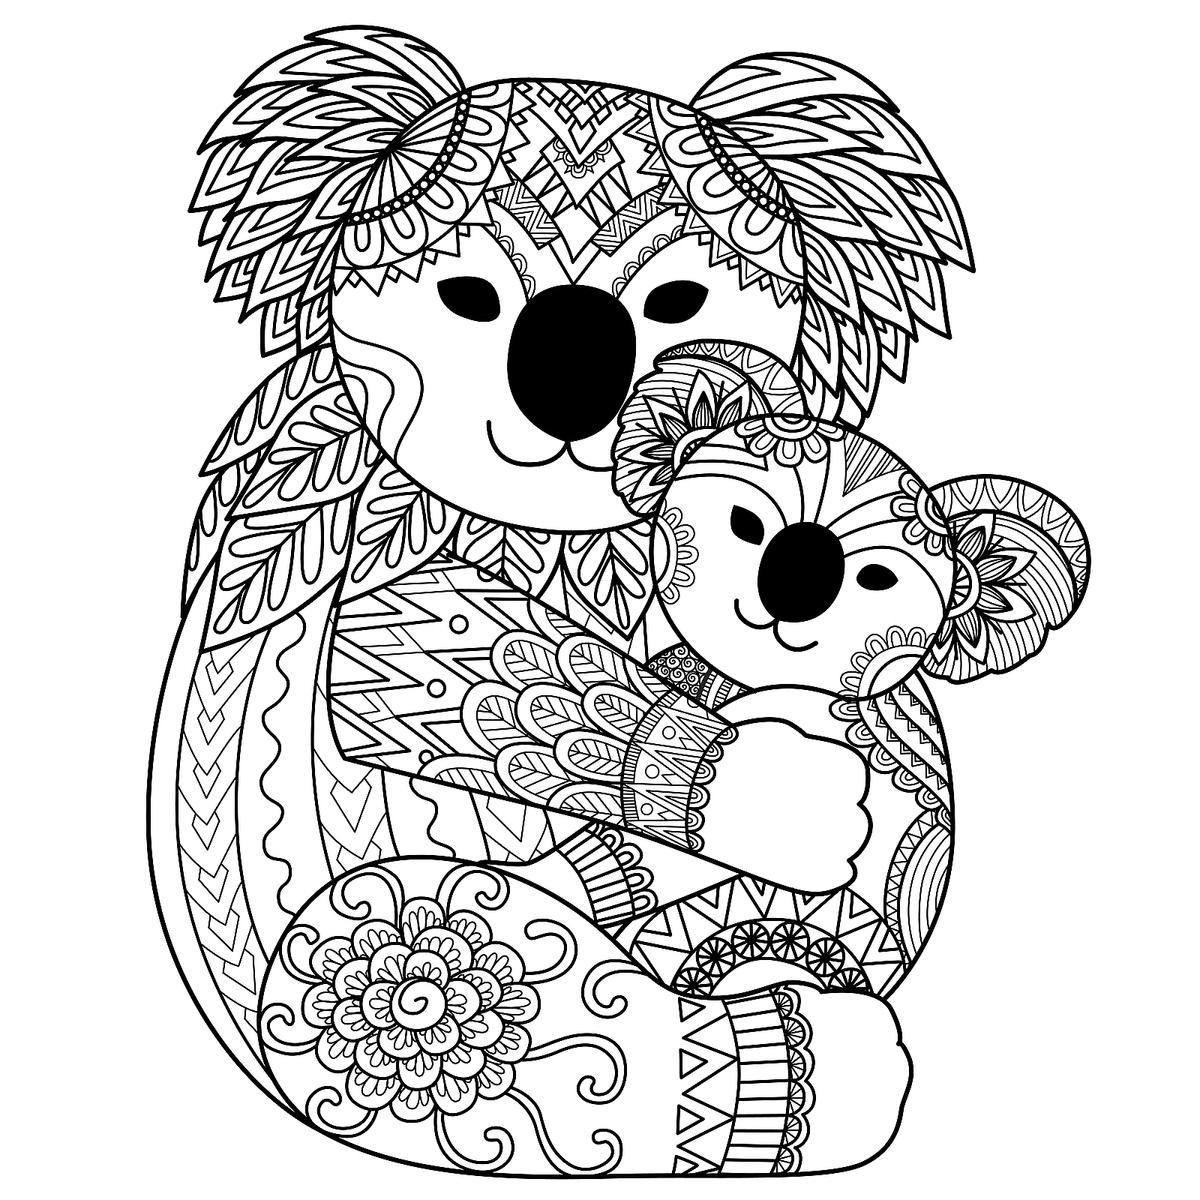 Animal Coloring Pages For Kids Free Printable Coloring Pages Of Animals We Love Printables 30Seconds Mom - Free Printable Animal Coloring Pages